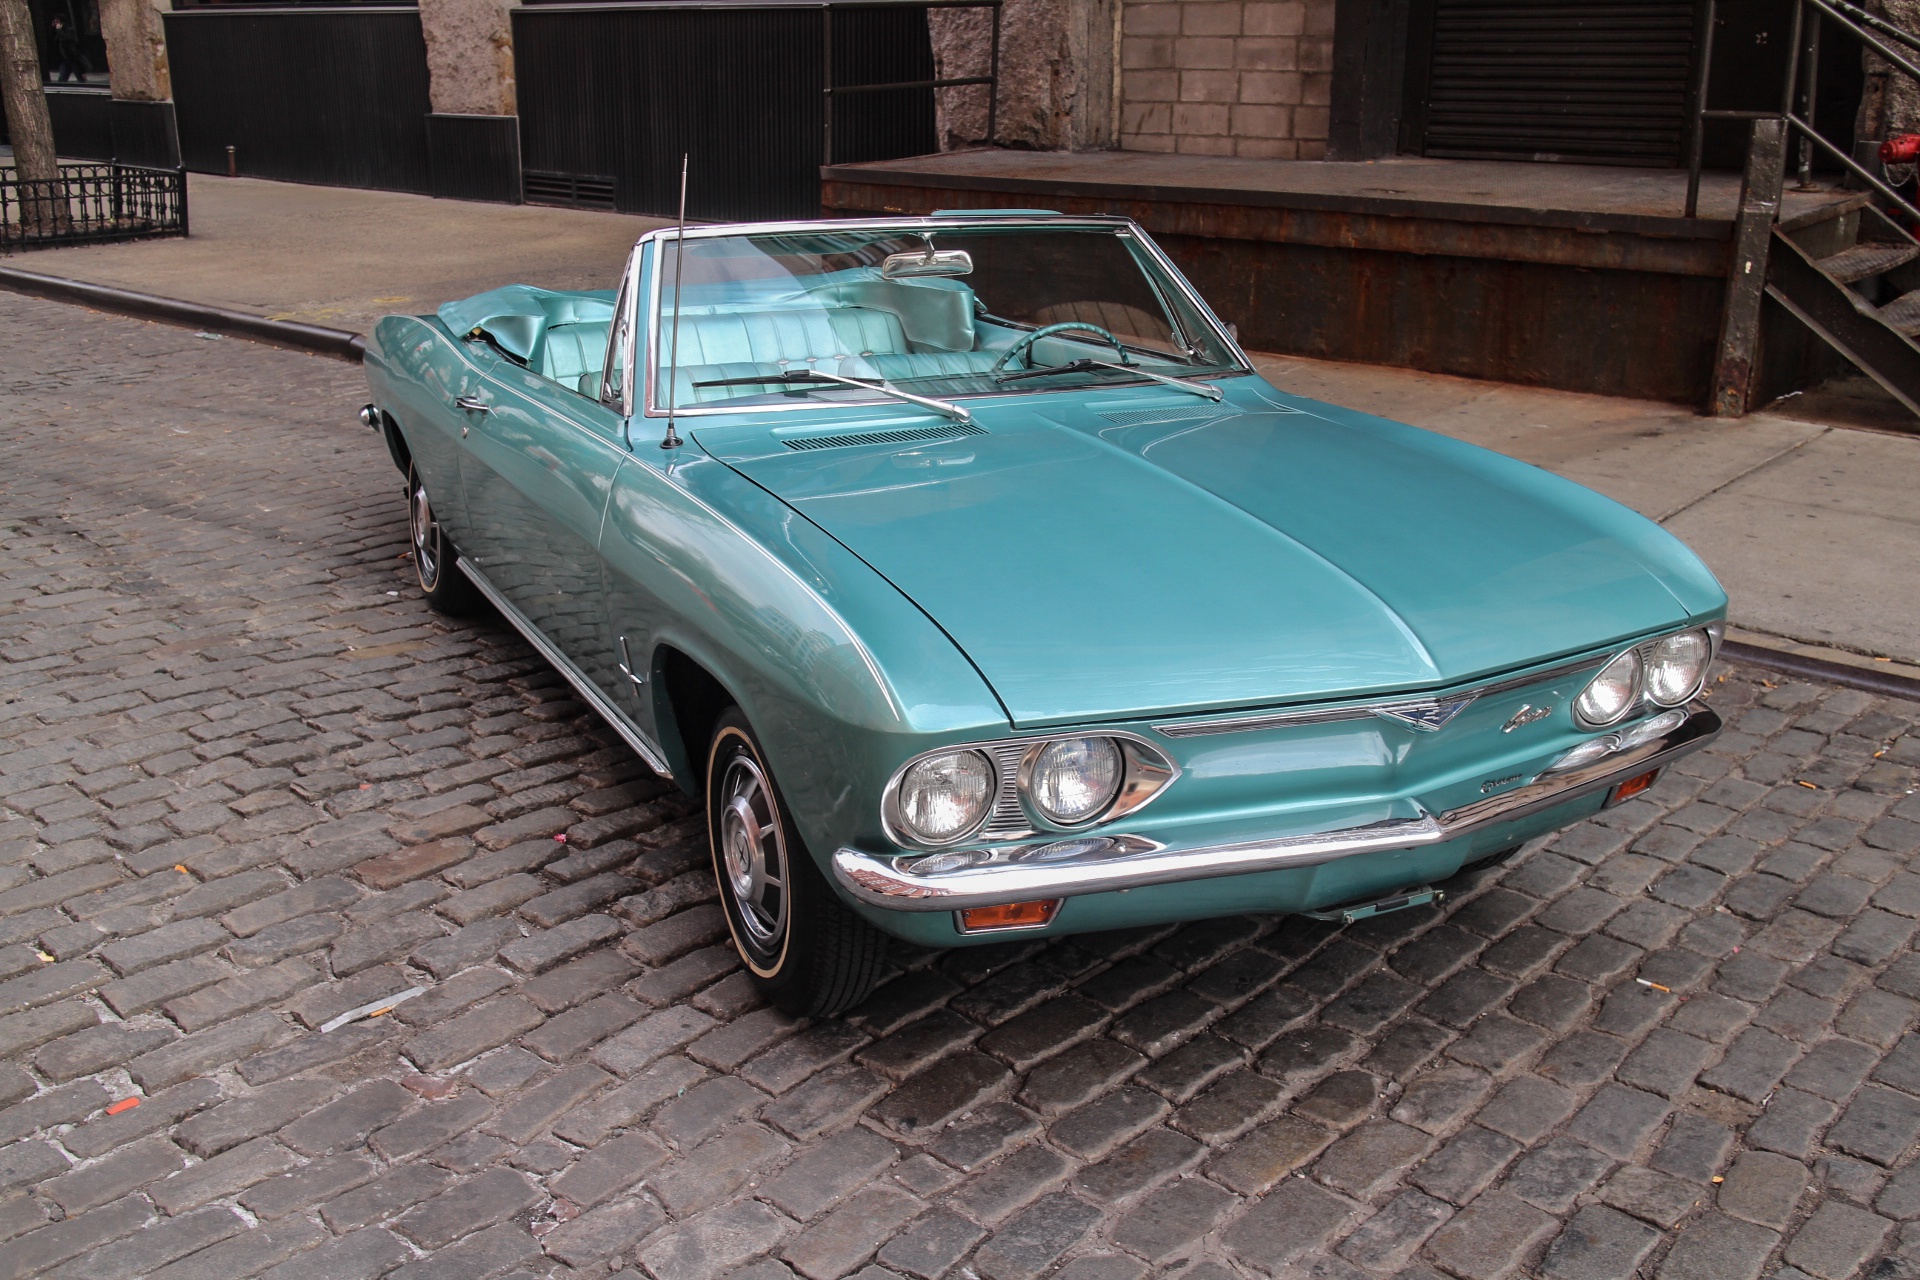 Used-1966-Chevrolet-Corvair-Monza.